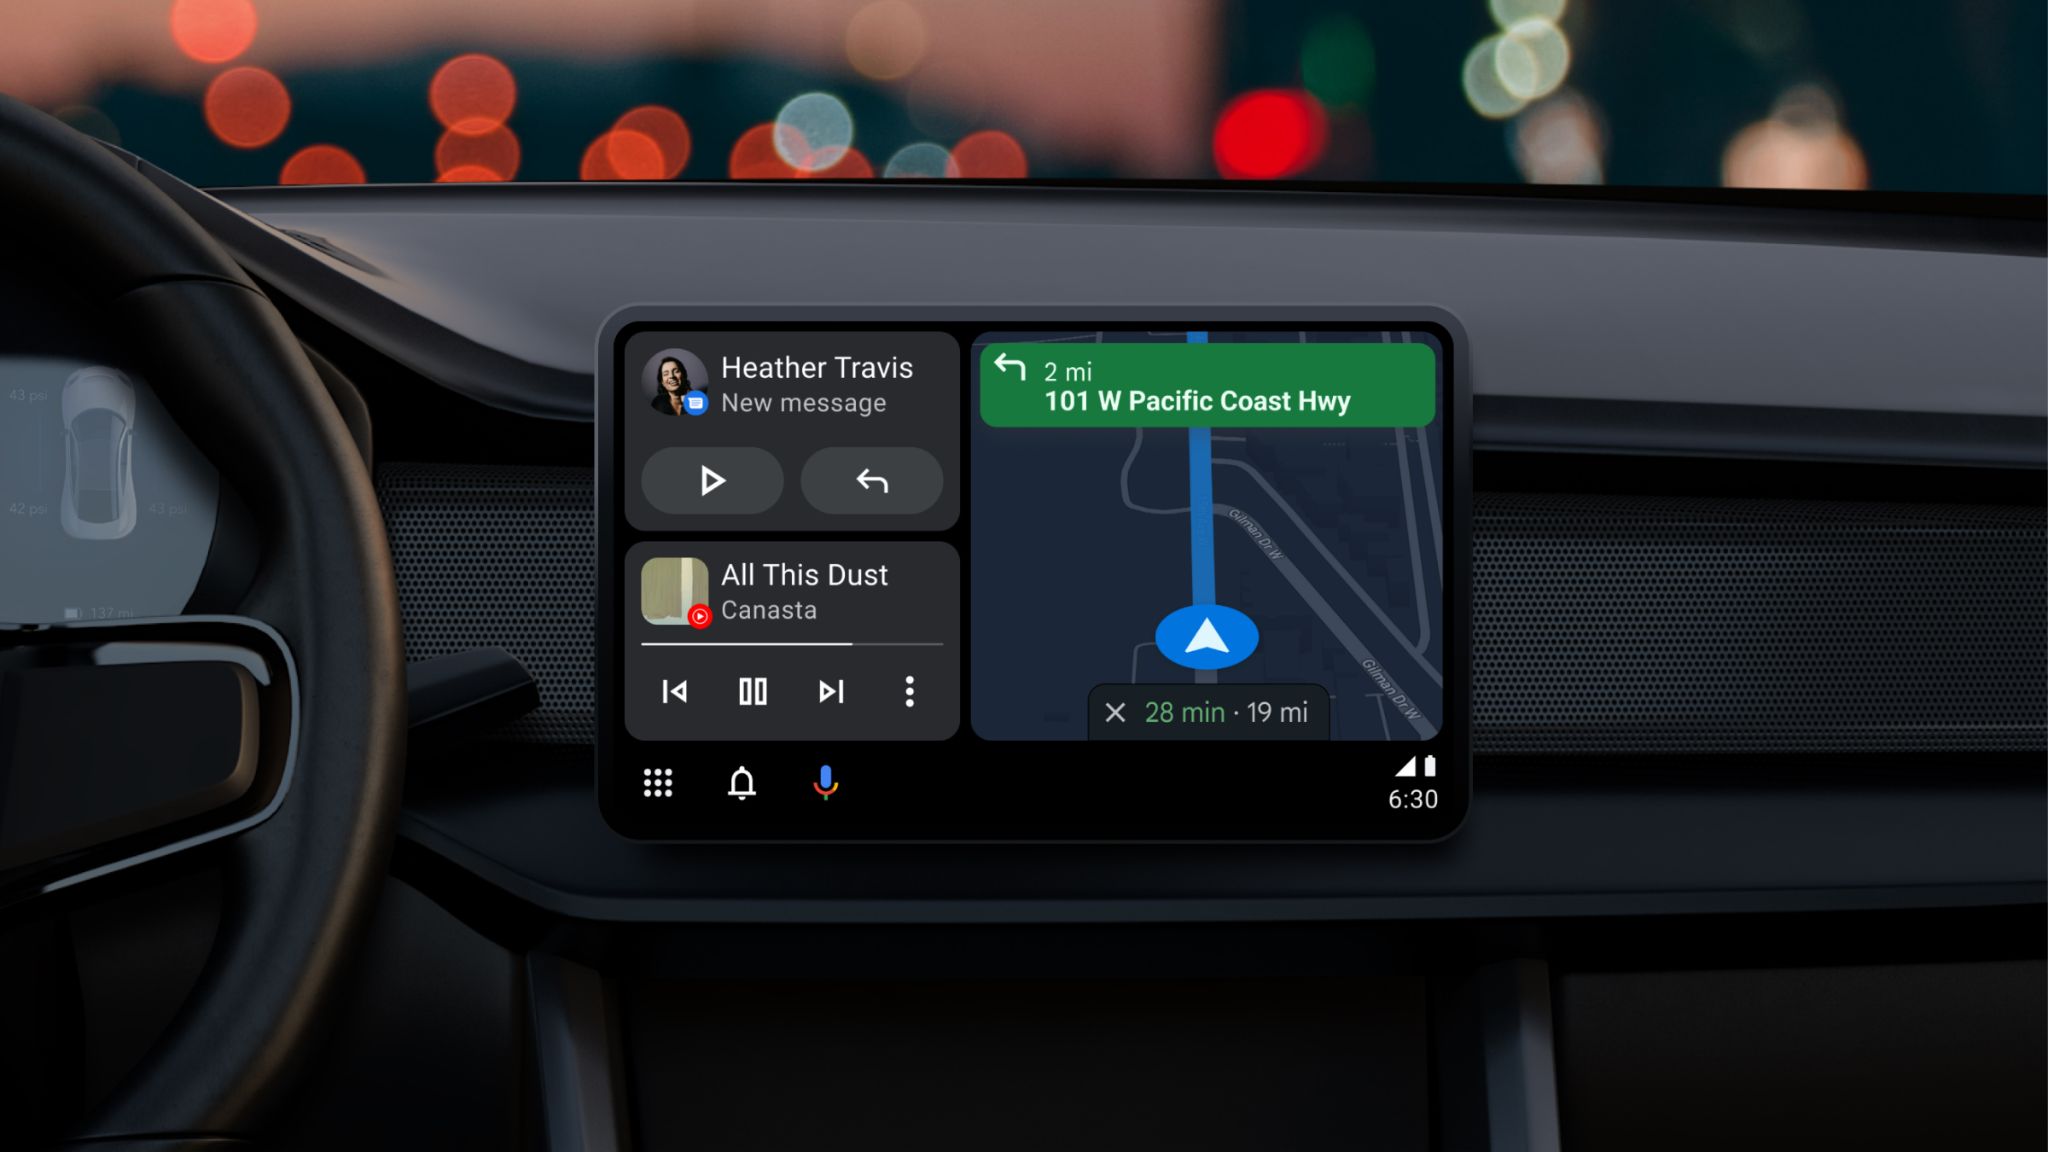 One of my major Android Auto frustrations is finally getting fixed